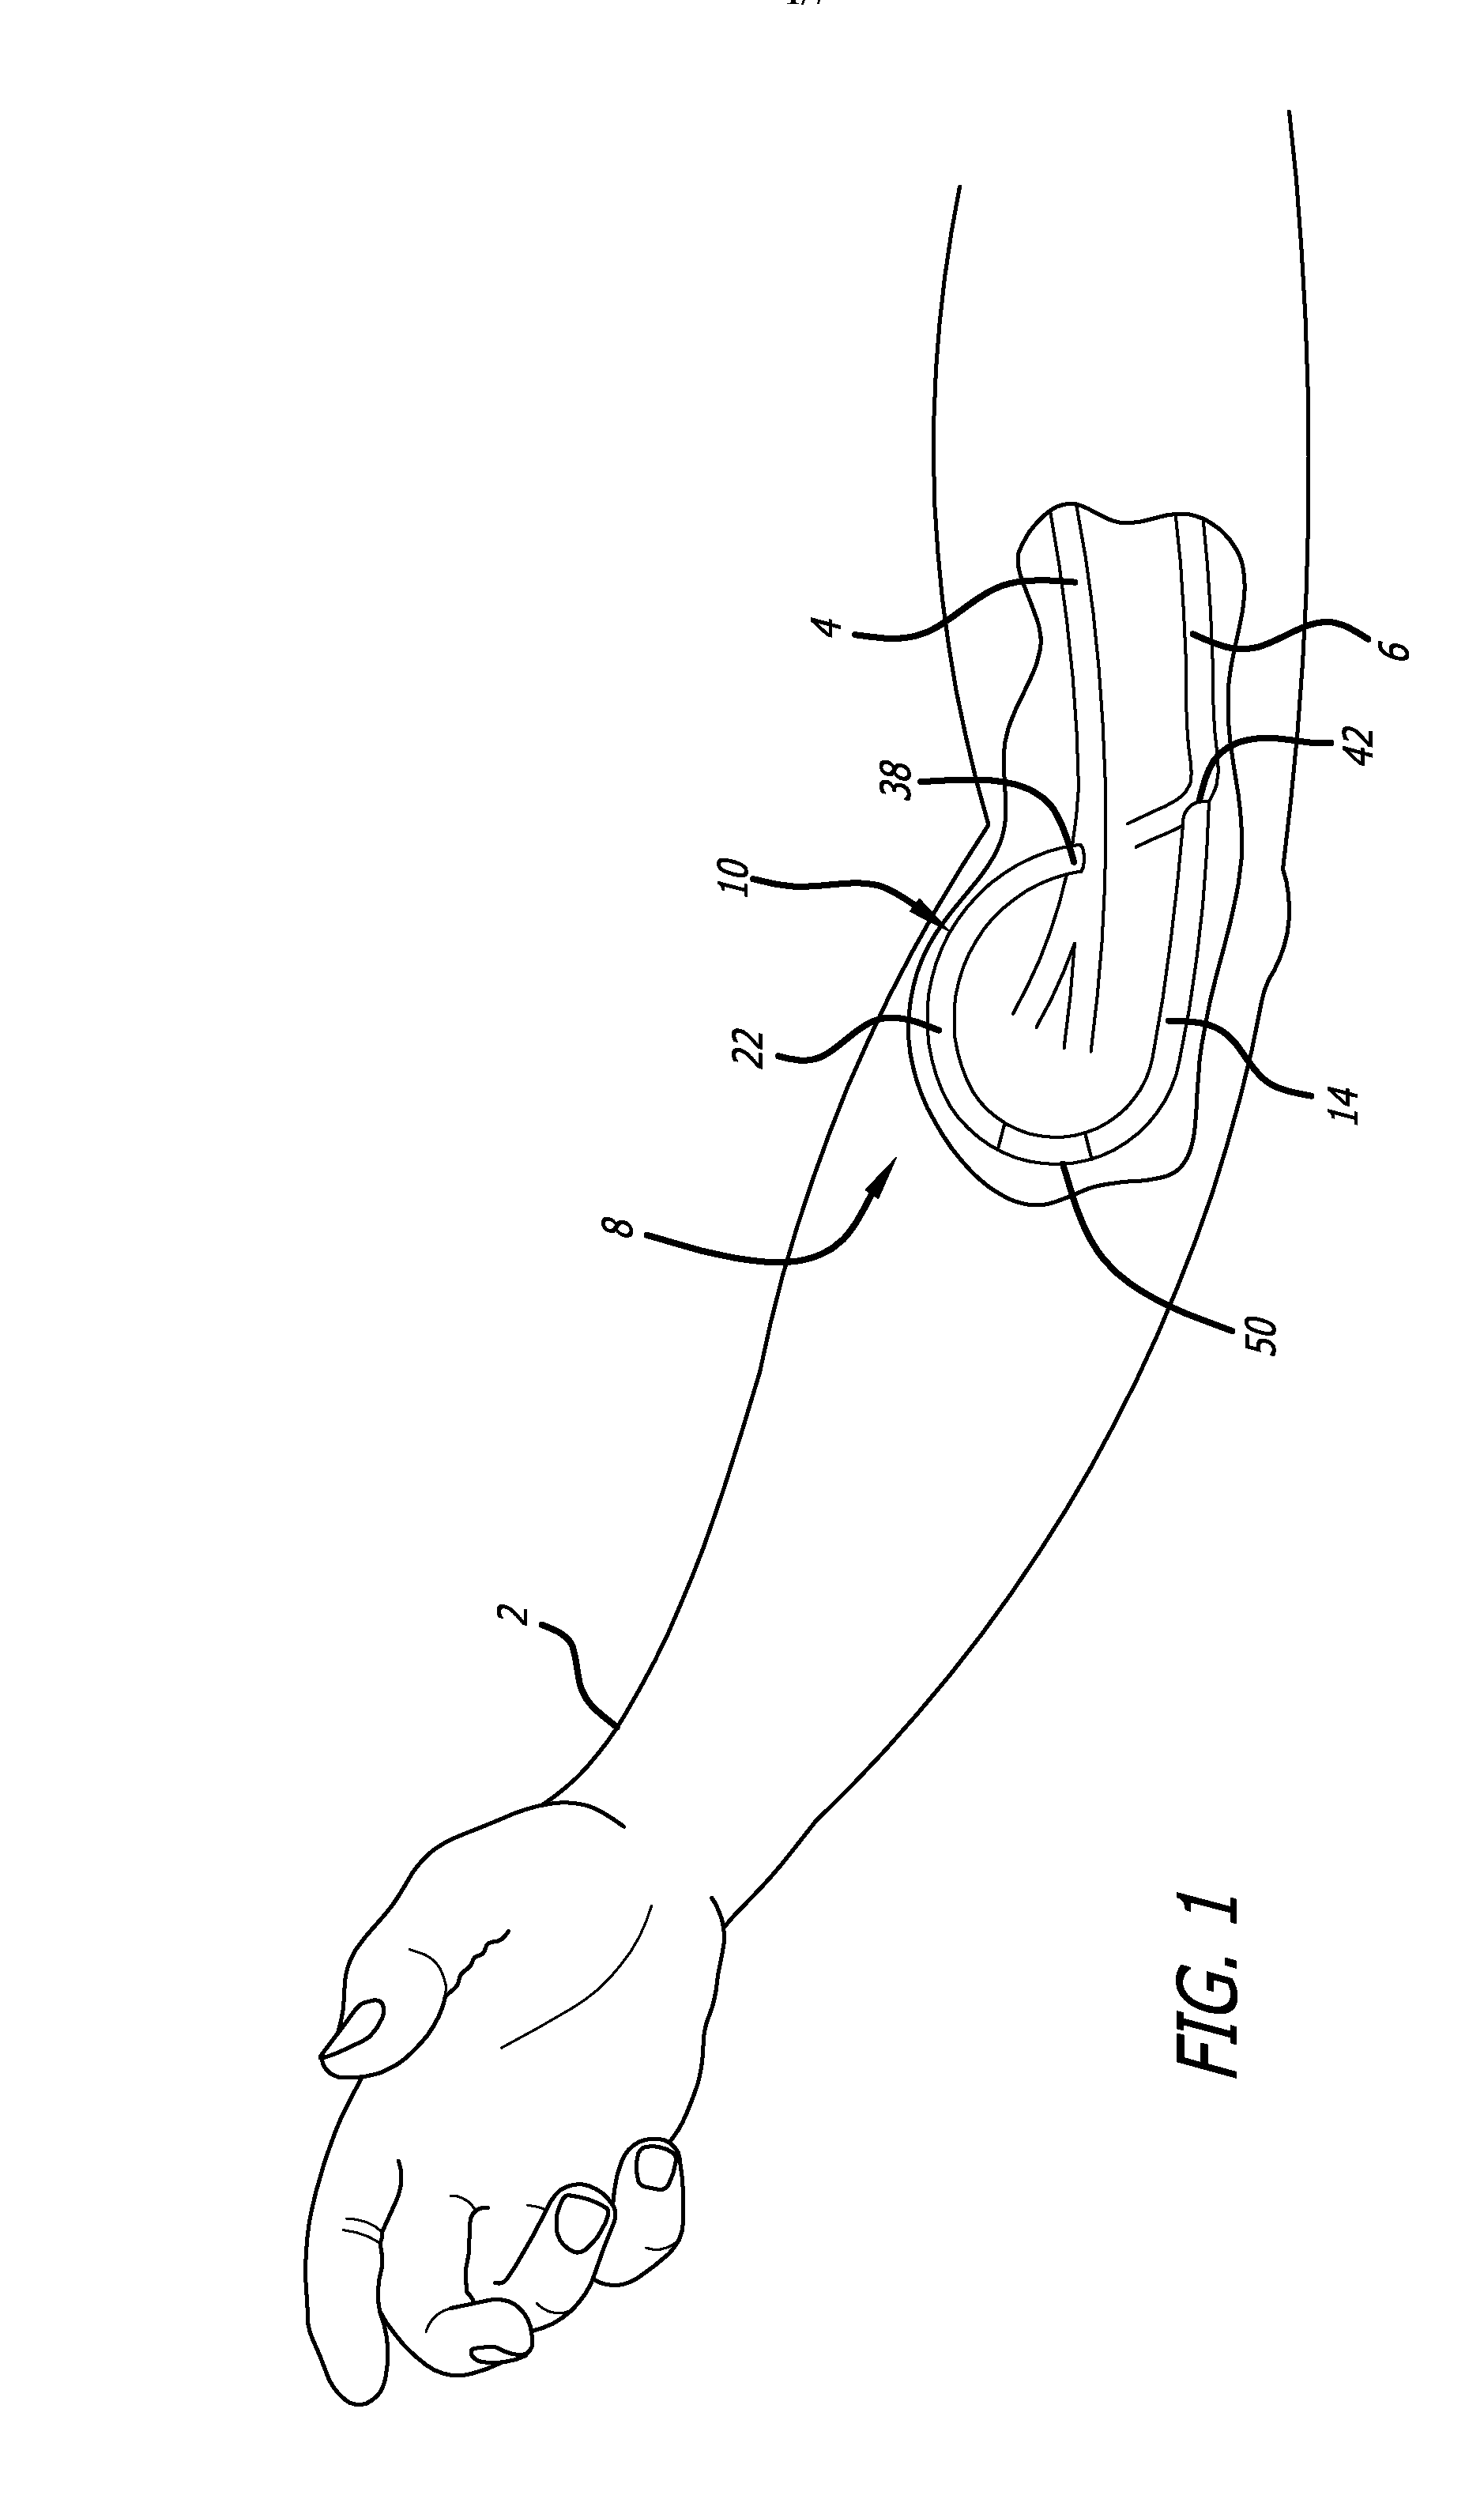 Vascular graft prosthesis with selective flow reduction